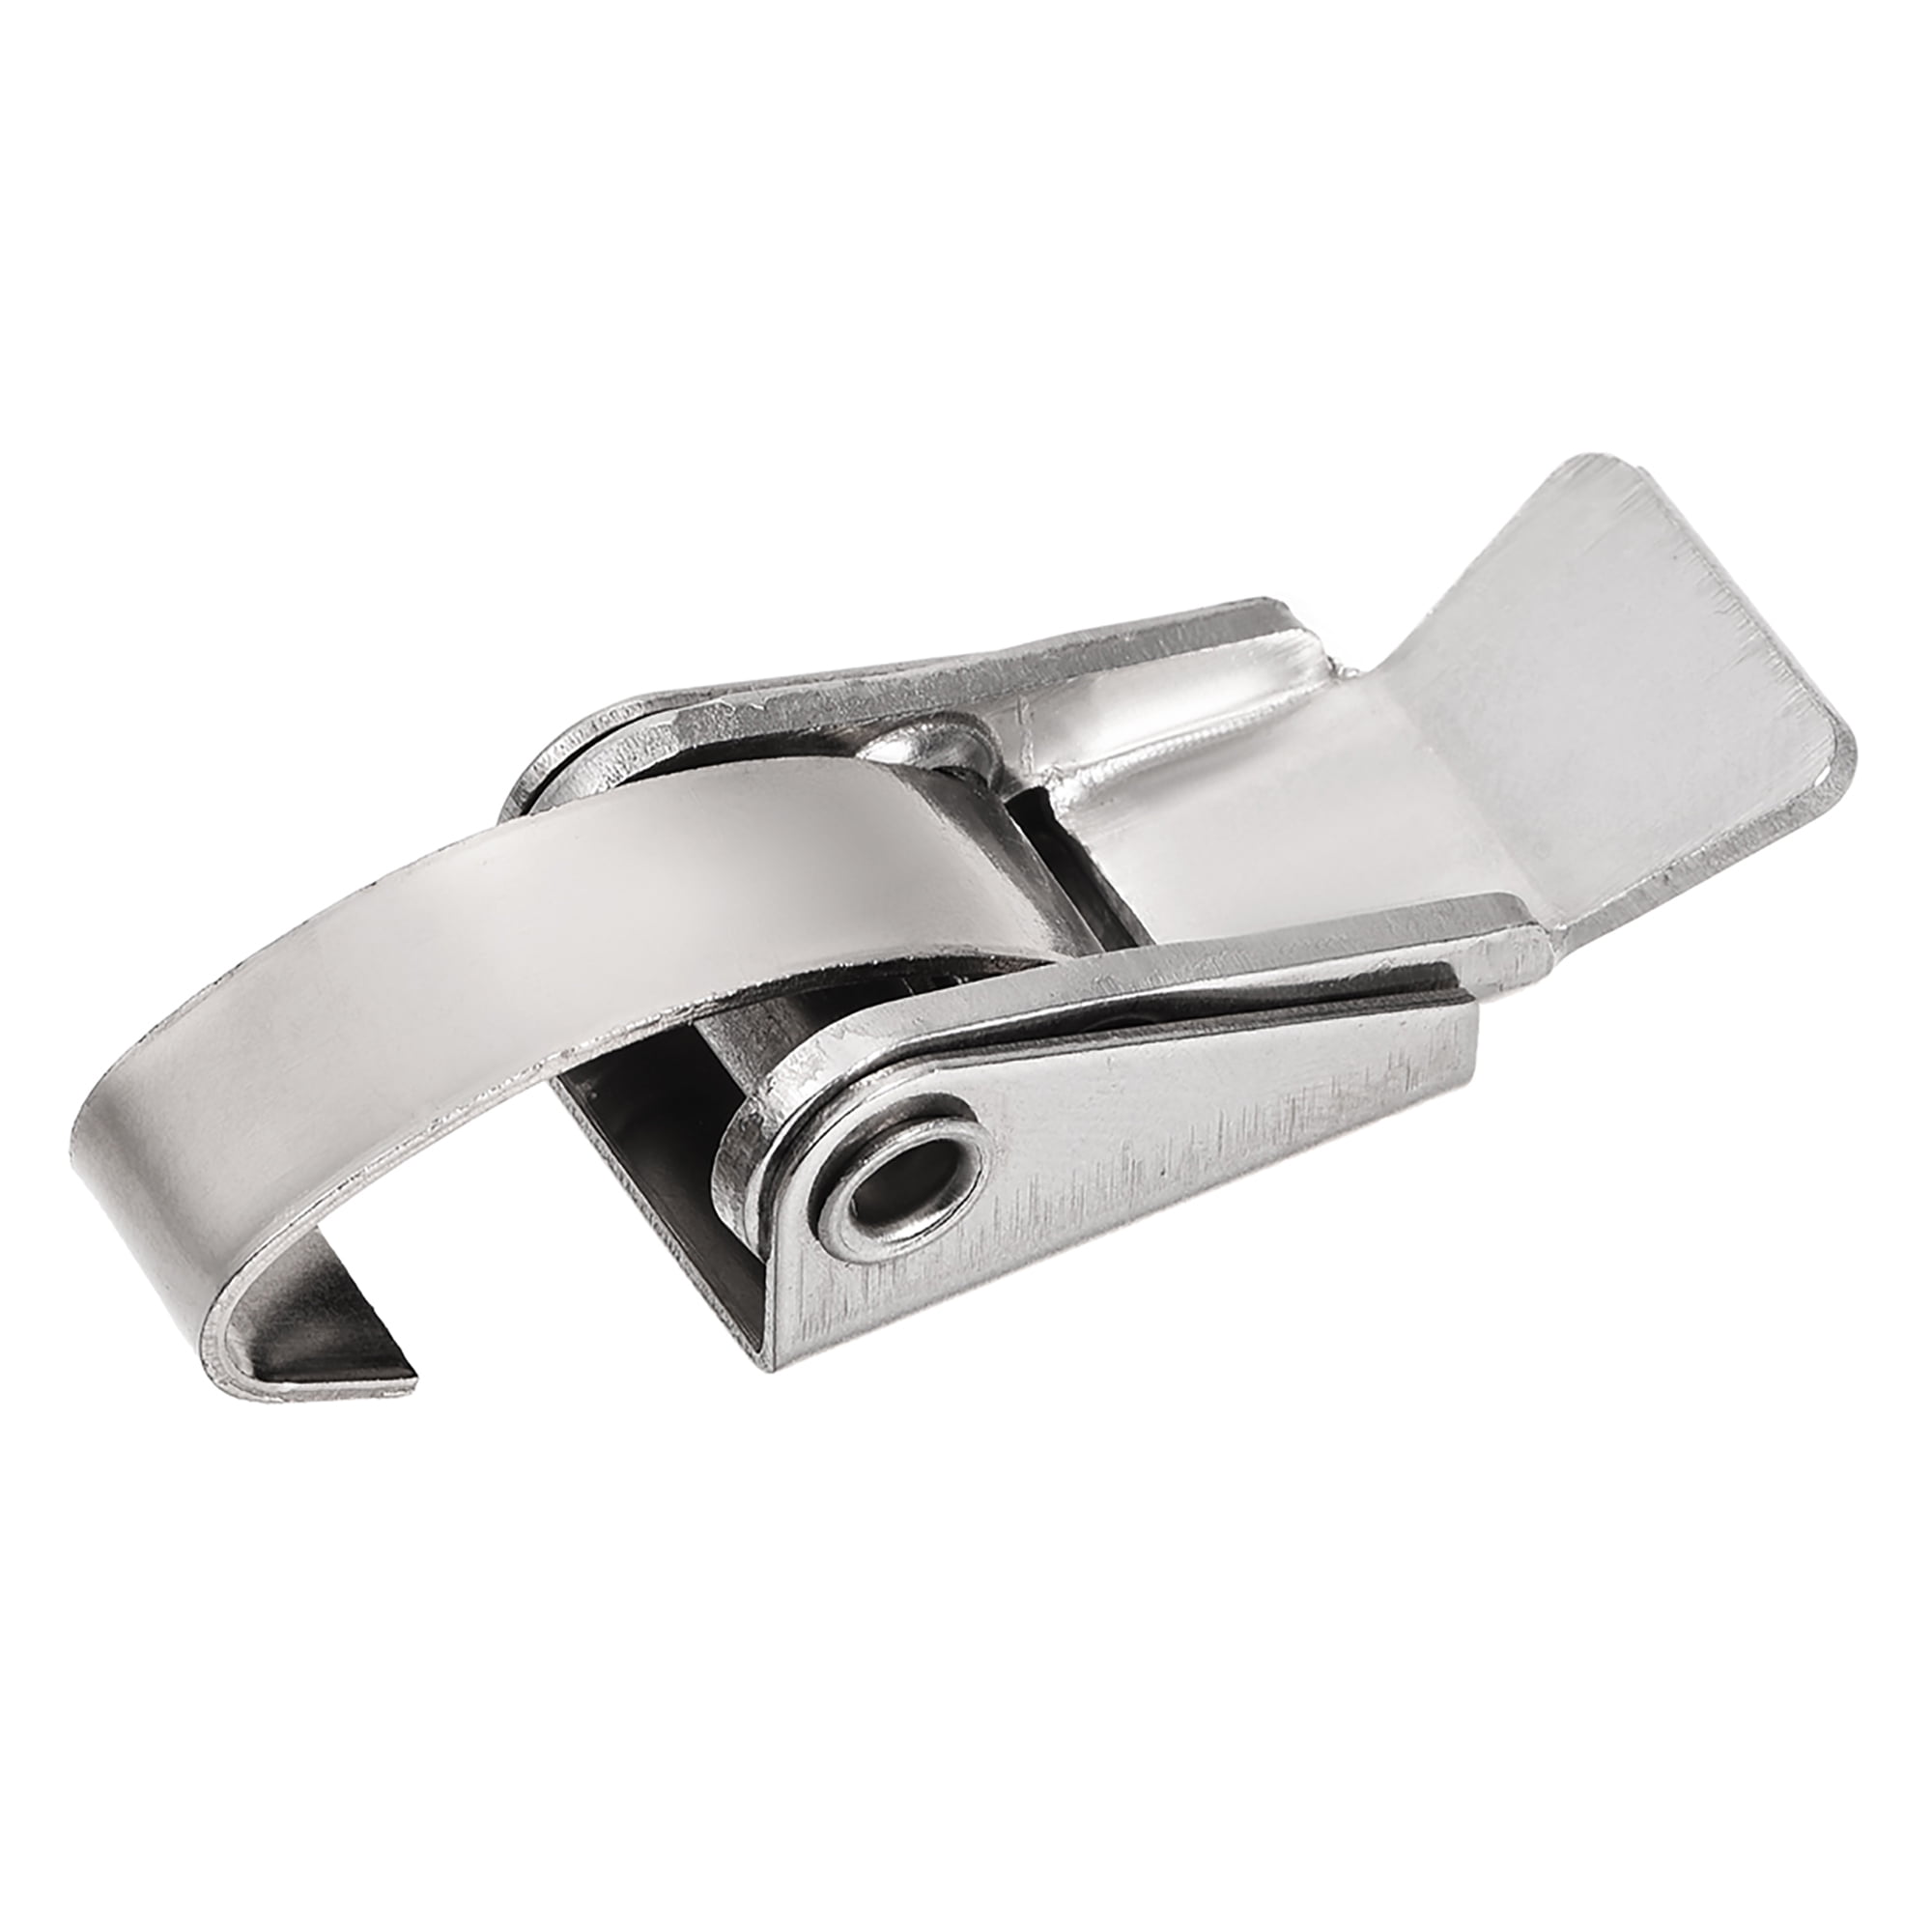 GN 833 Steel / Stainless Steel Toggle Hook Latches